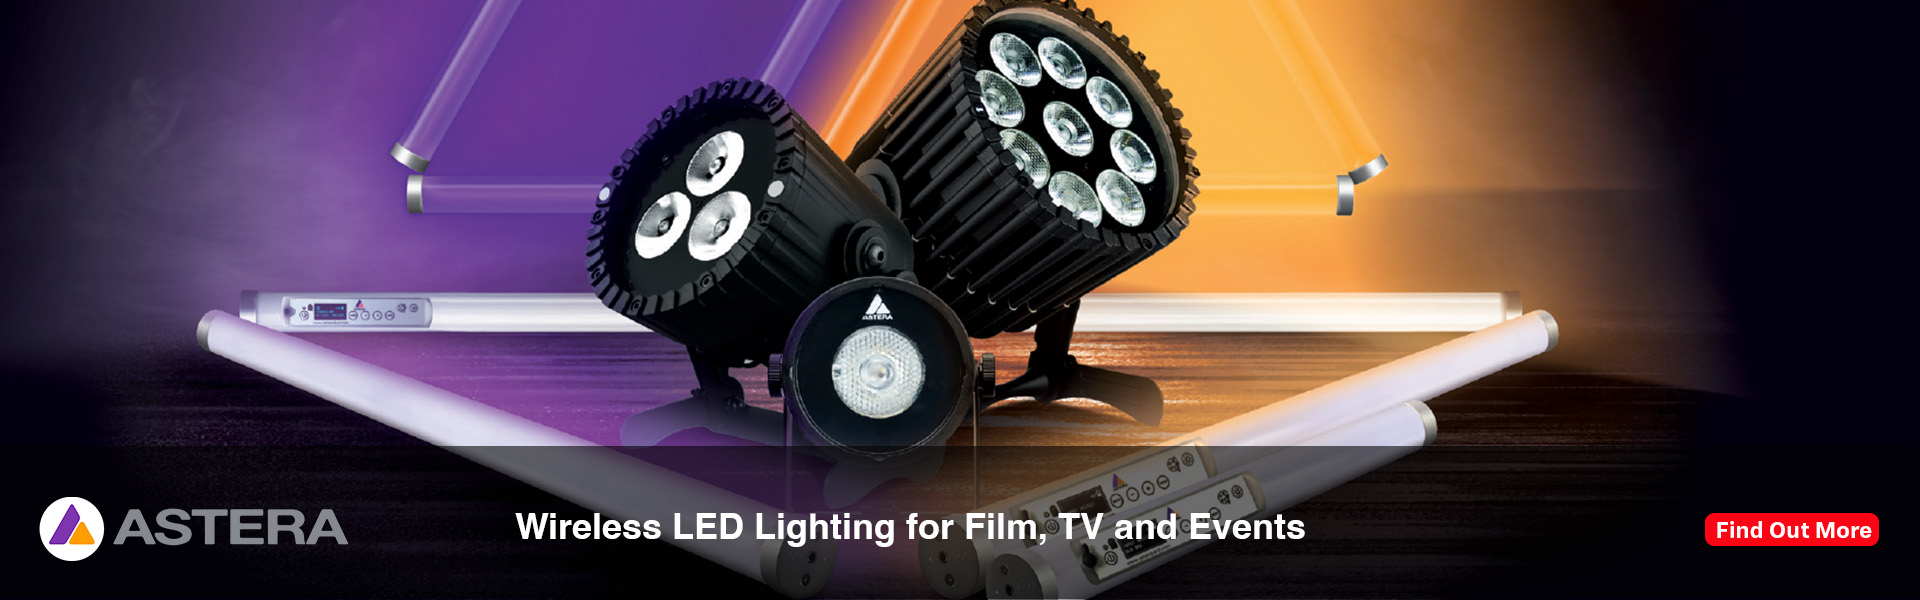 Astera Wireless LED lighting products for TV, Film and Event Production